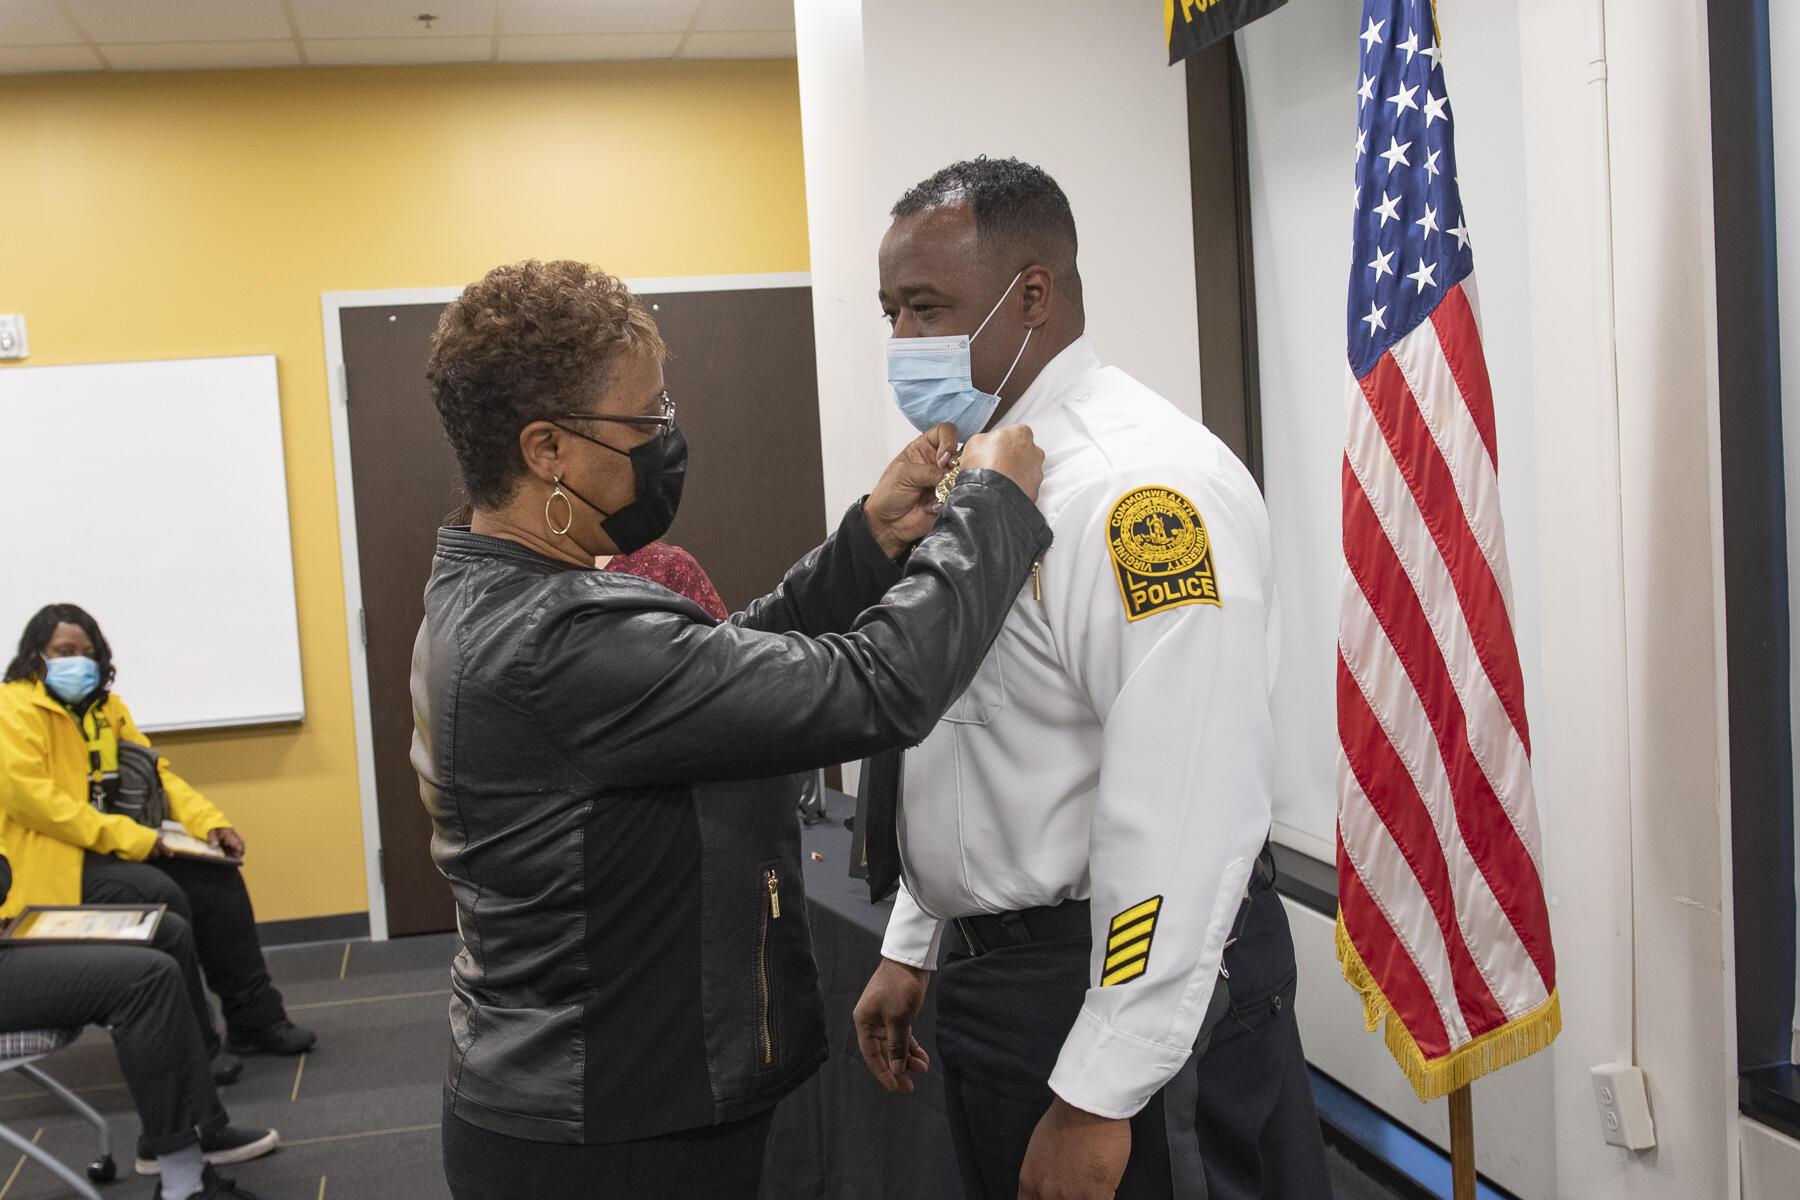 As part of the ceremony marking his promotion to assistant chief of police, Ervin Taylor, right, receives an \"assistant chief\" badge on his uniform, pinned by his mother